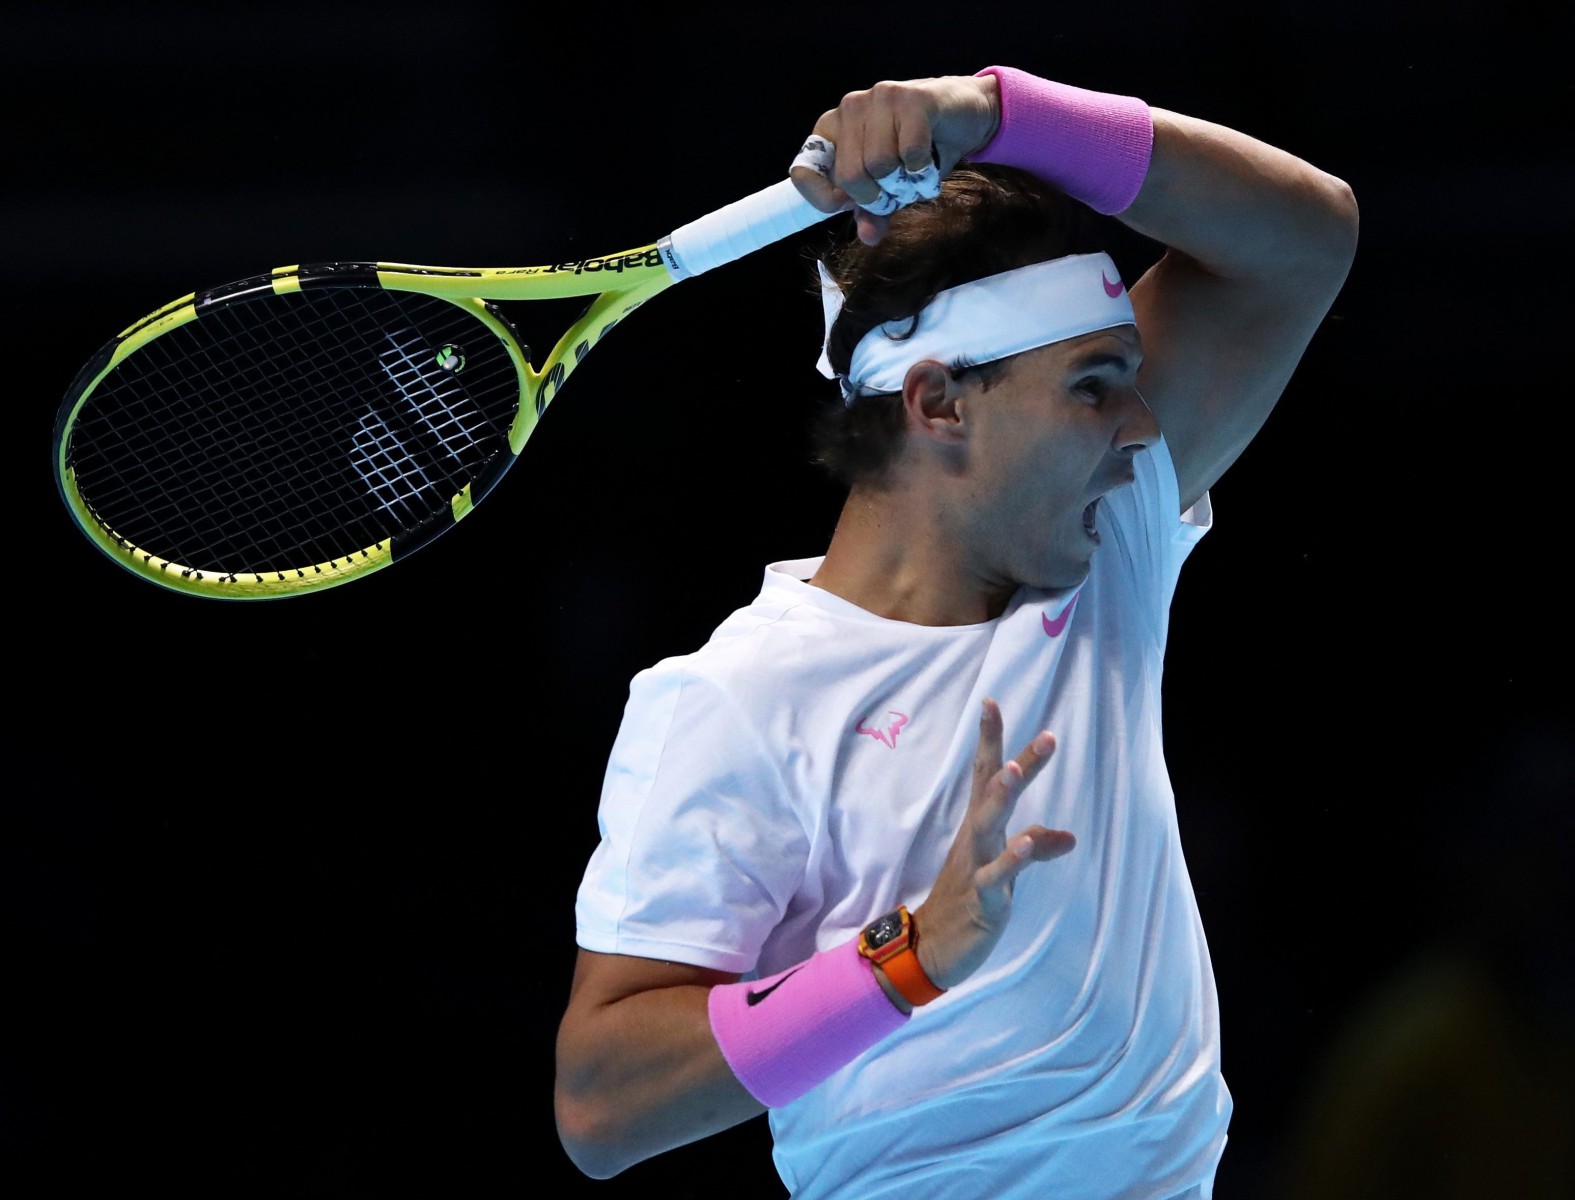 Nadal was edged out after a close first set, losing the tie-break 7-4 but battled back to win the second 6-4